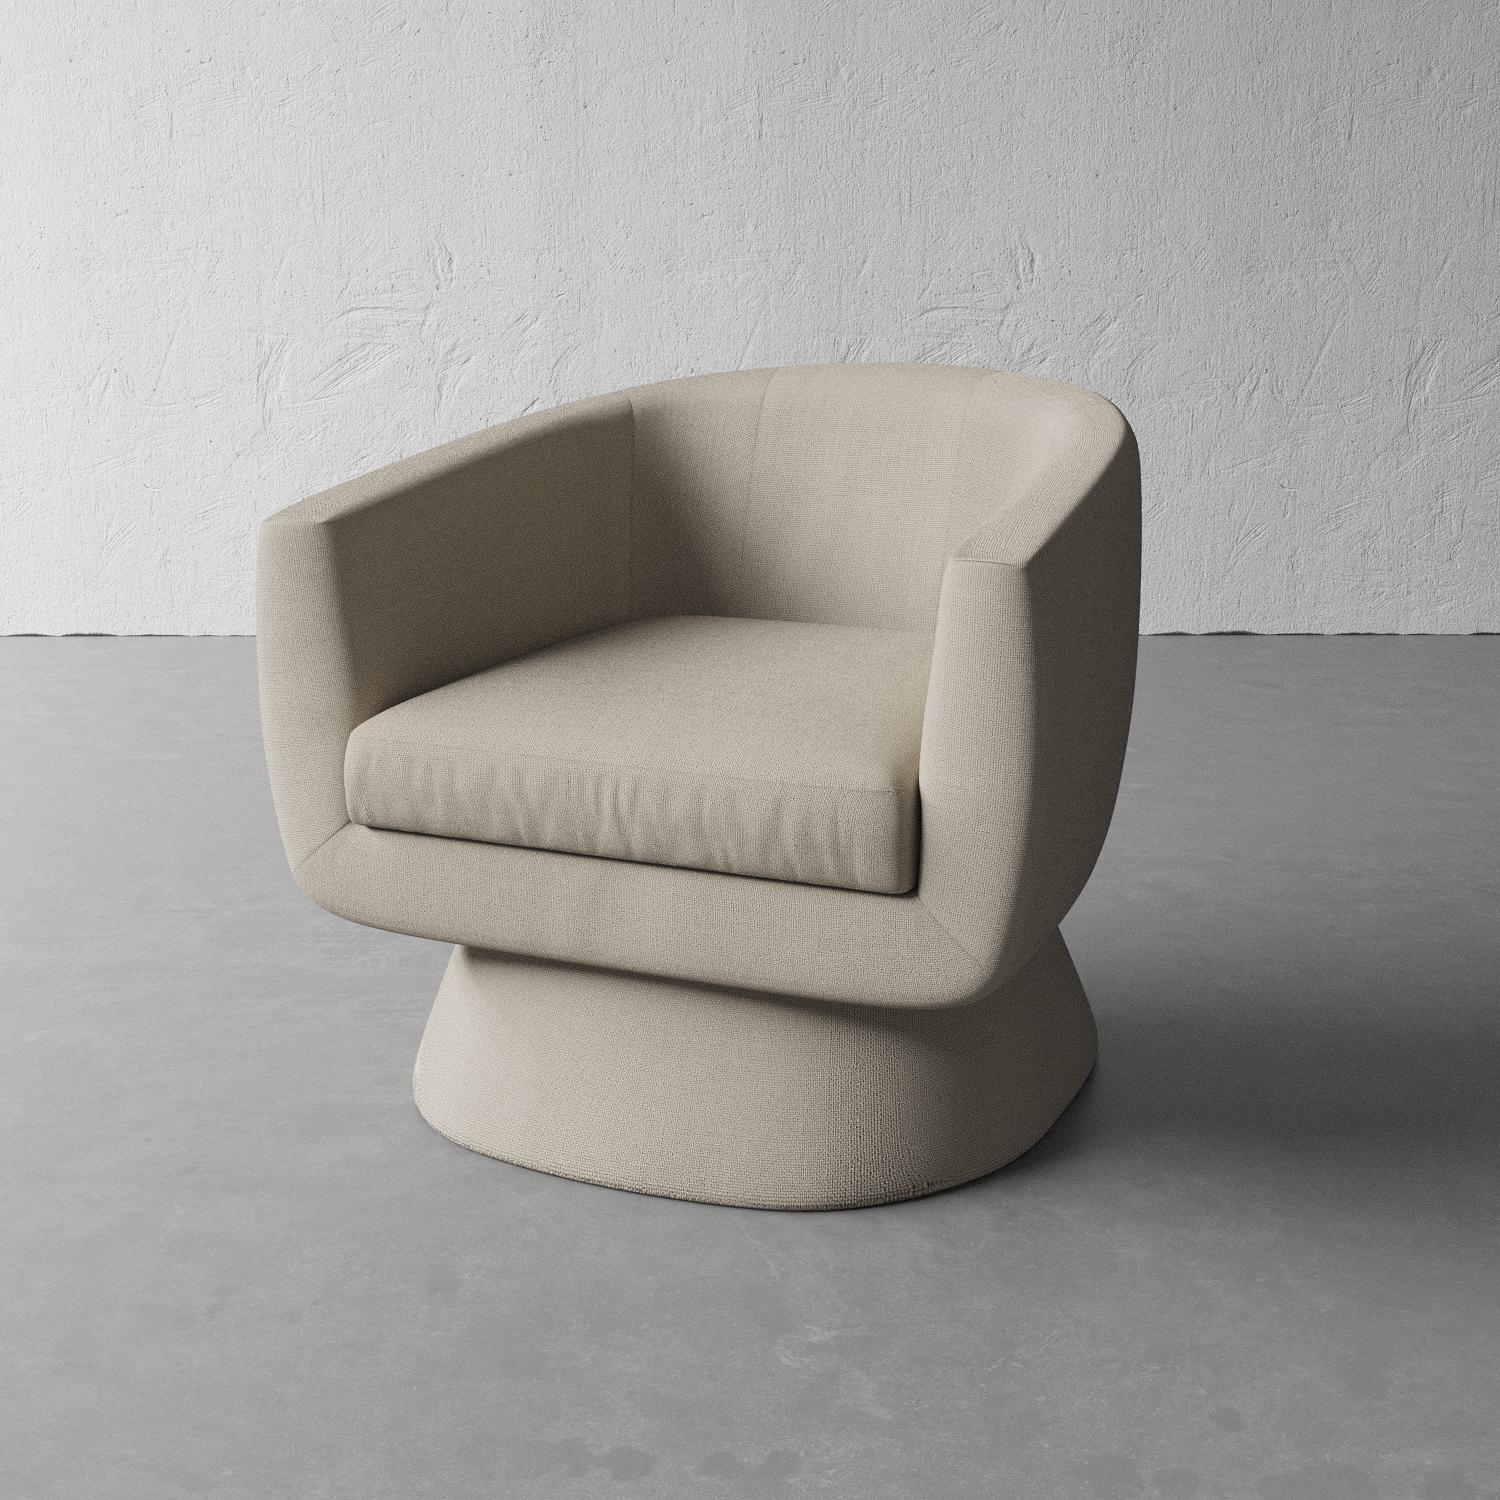 This sculptural cushioned chair features a modern cup-like seat poised atop a pedestal. Available in a variety of custom fabrics.

Ships in approximately 5-6 weeks. Listing shows Chair upholstered in Siena Natural linen Performance fabric. Contact